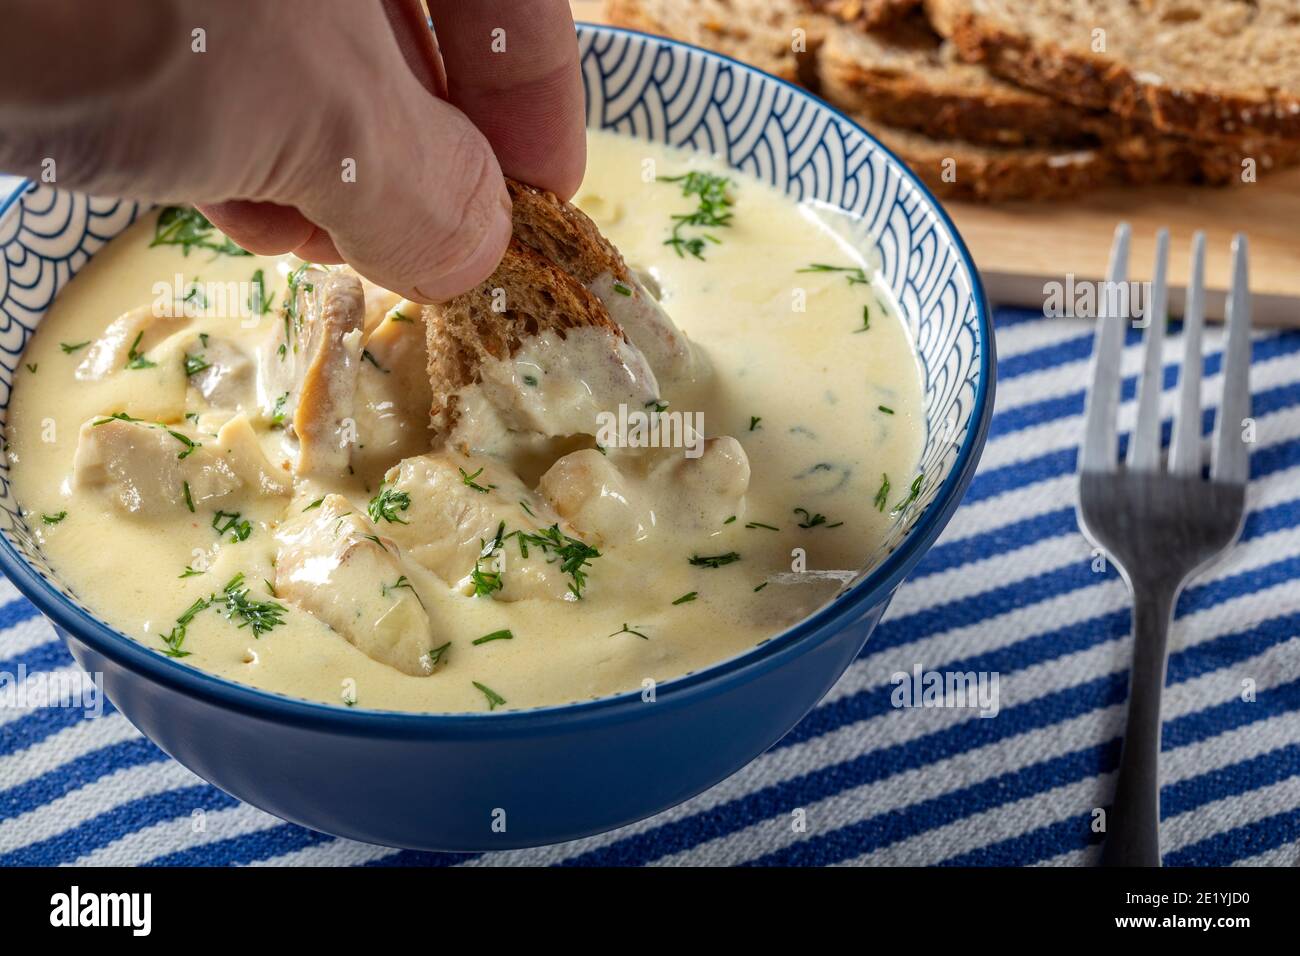 Eating chicken stew with mushrooms and cream - close up view Stock Photo